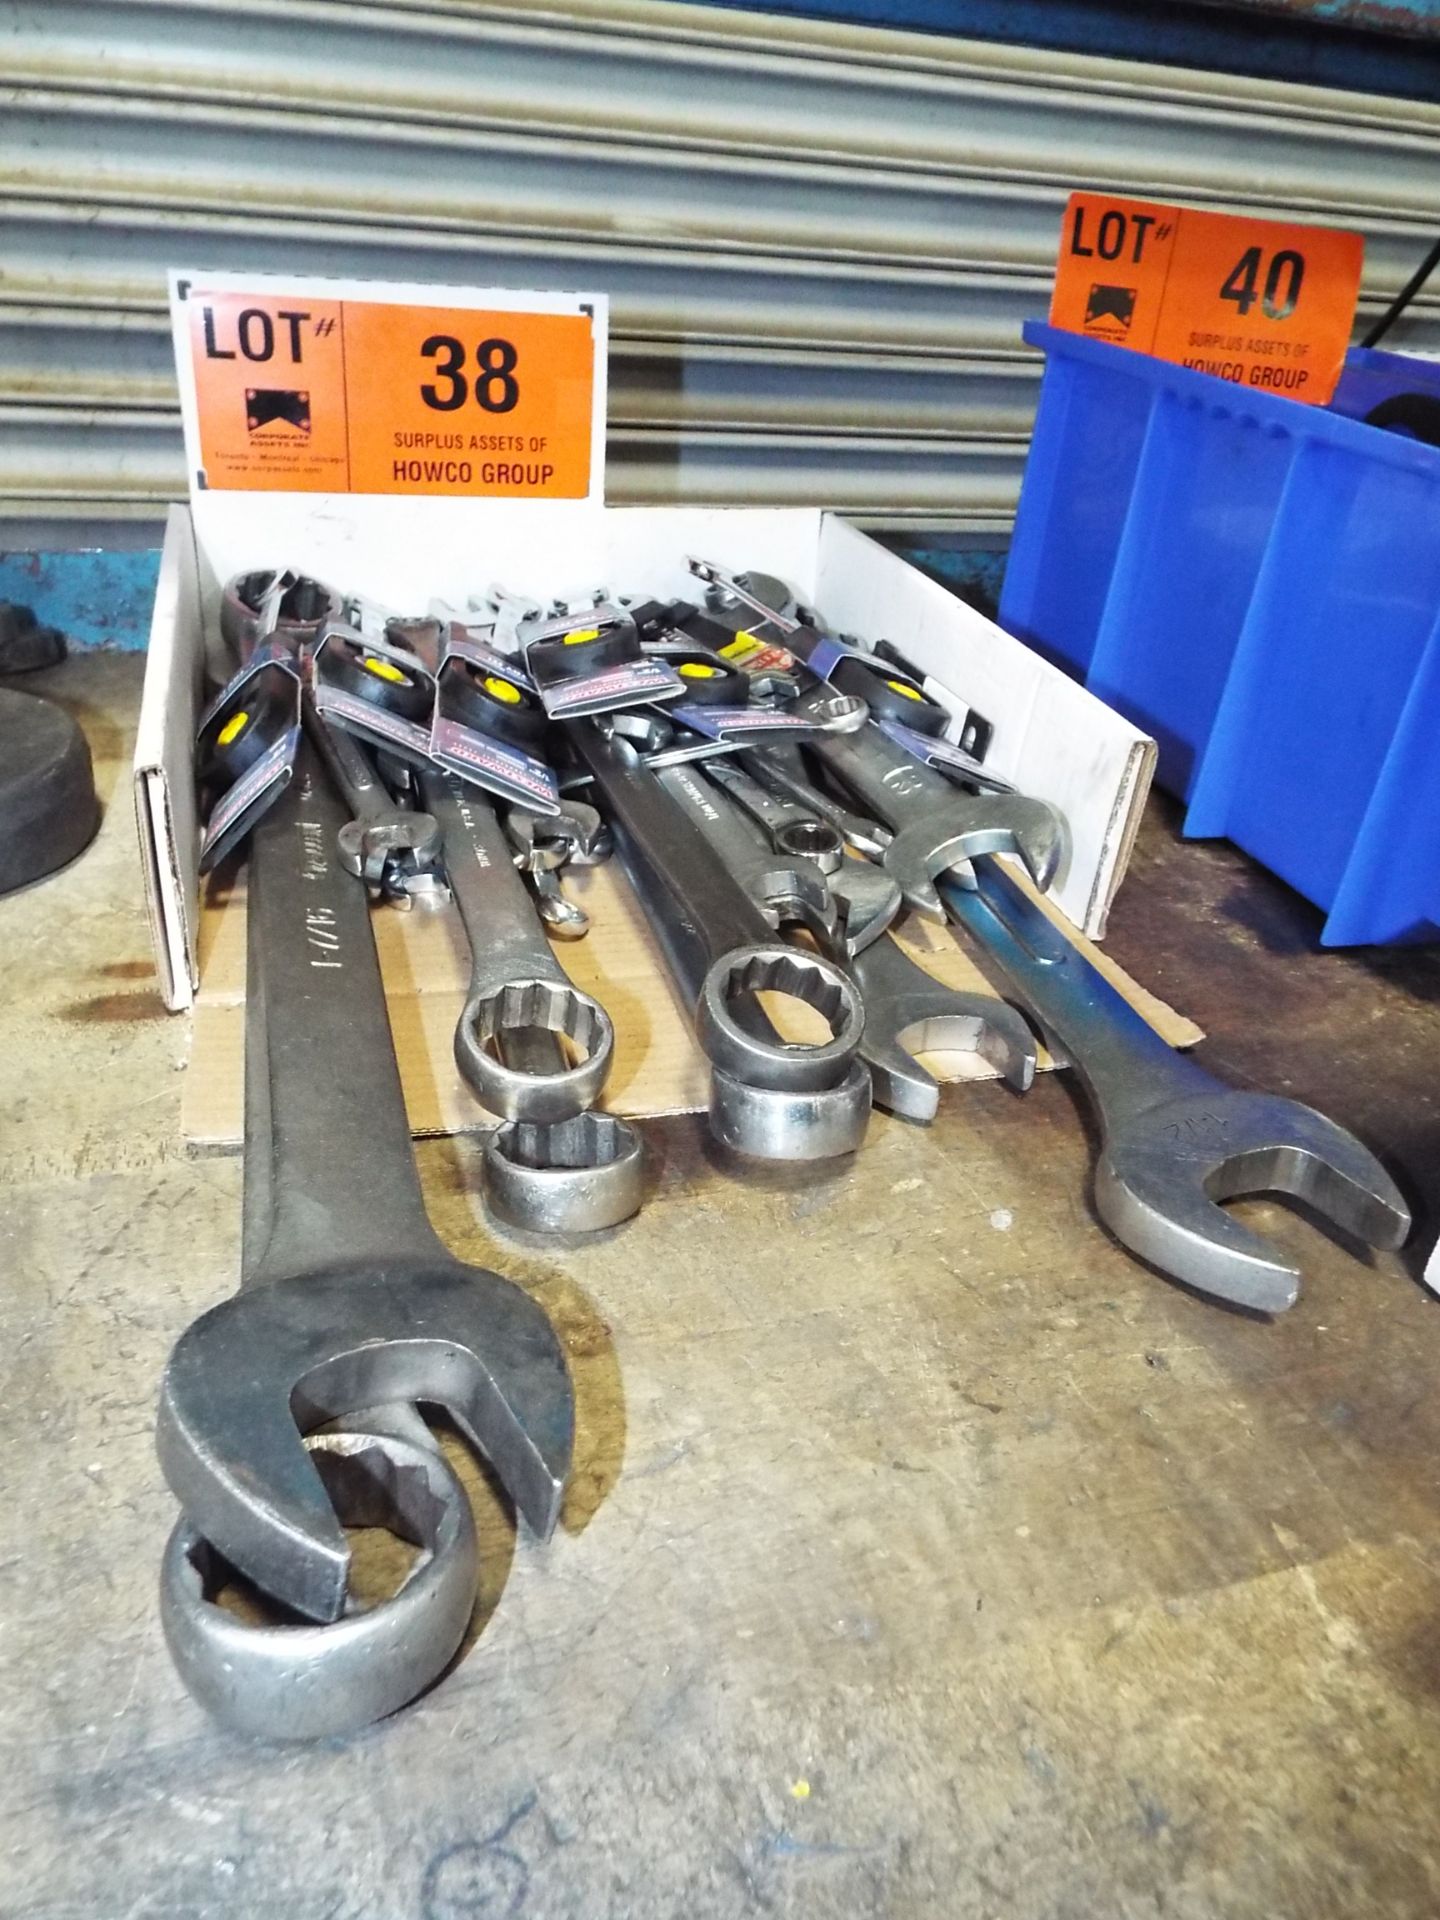 LOT/ COMBINATION WRENCHES